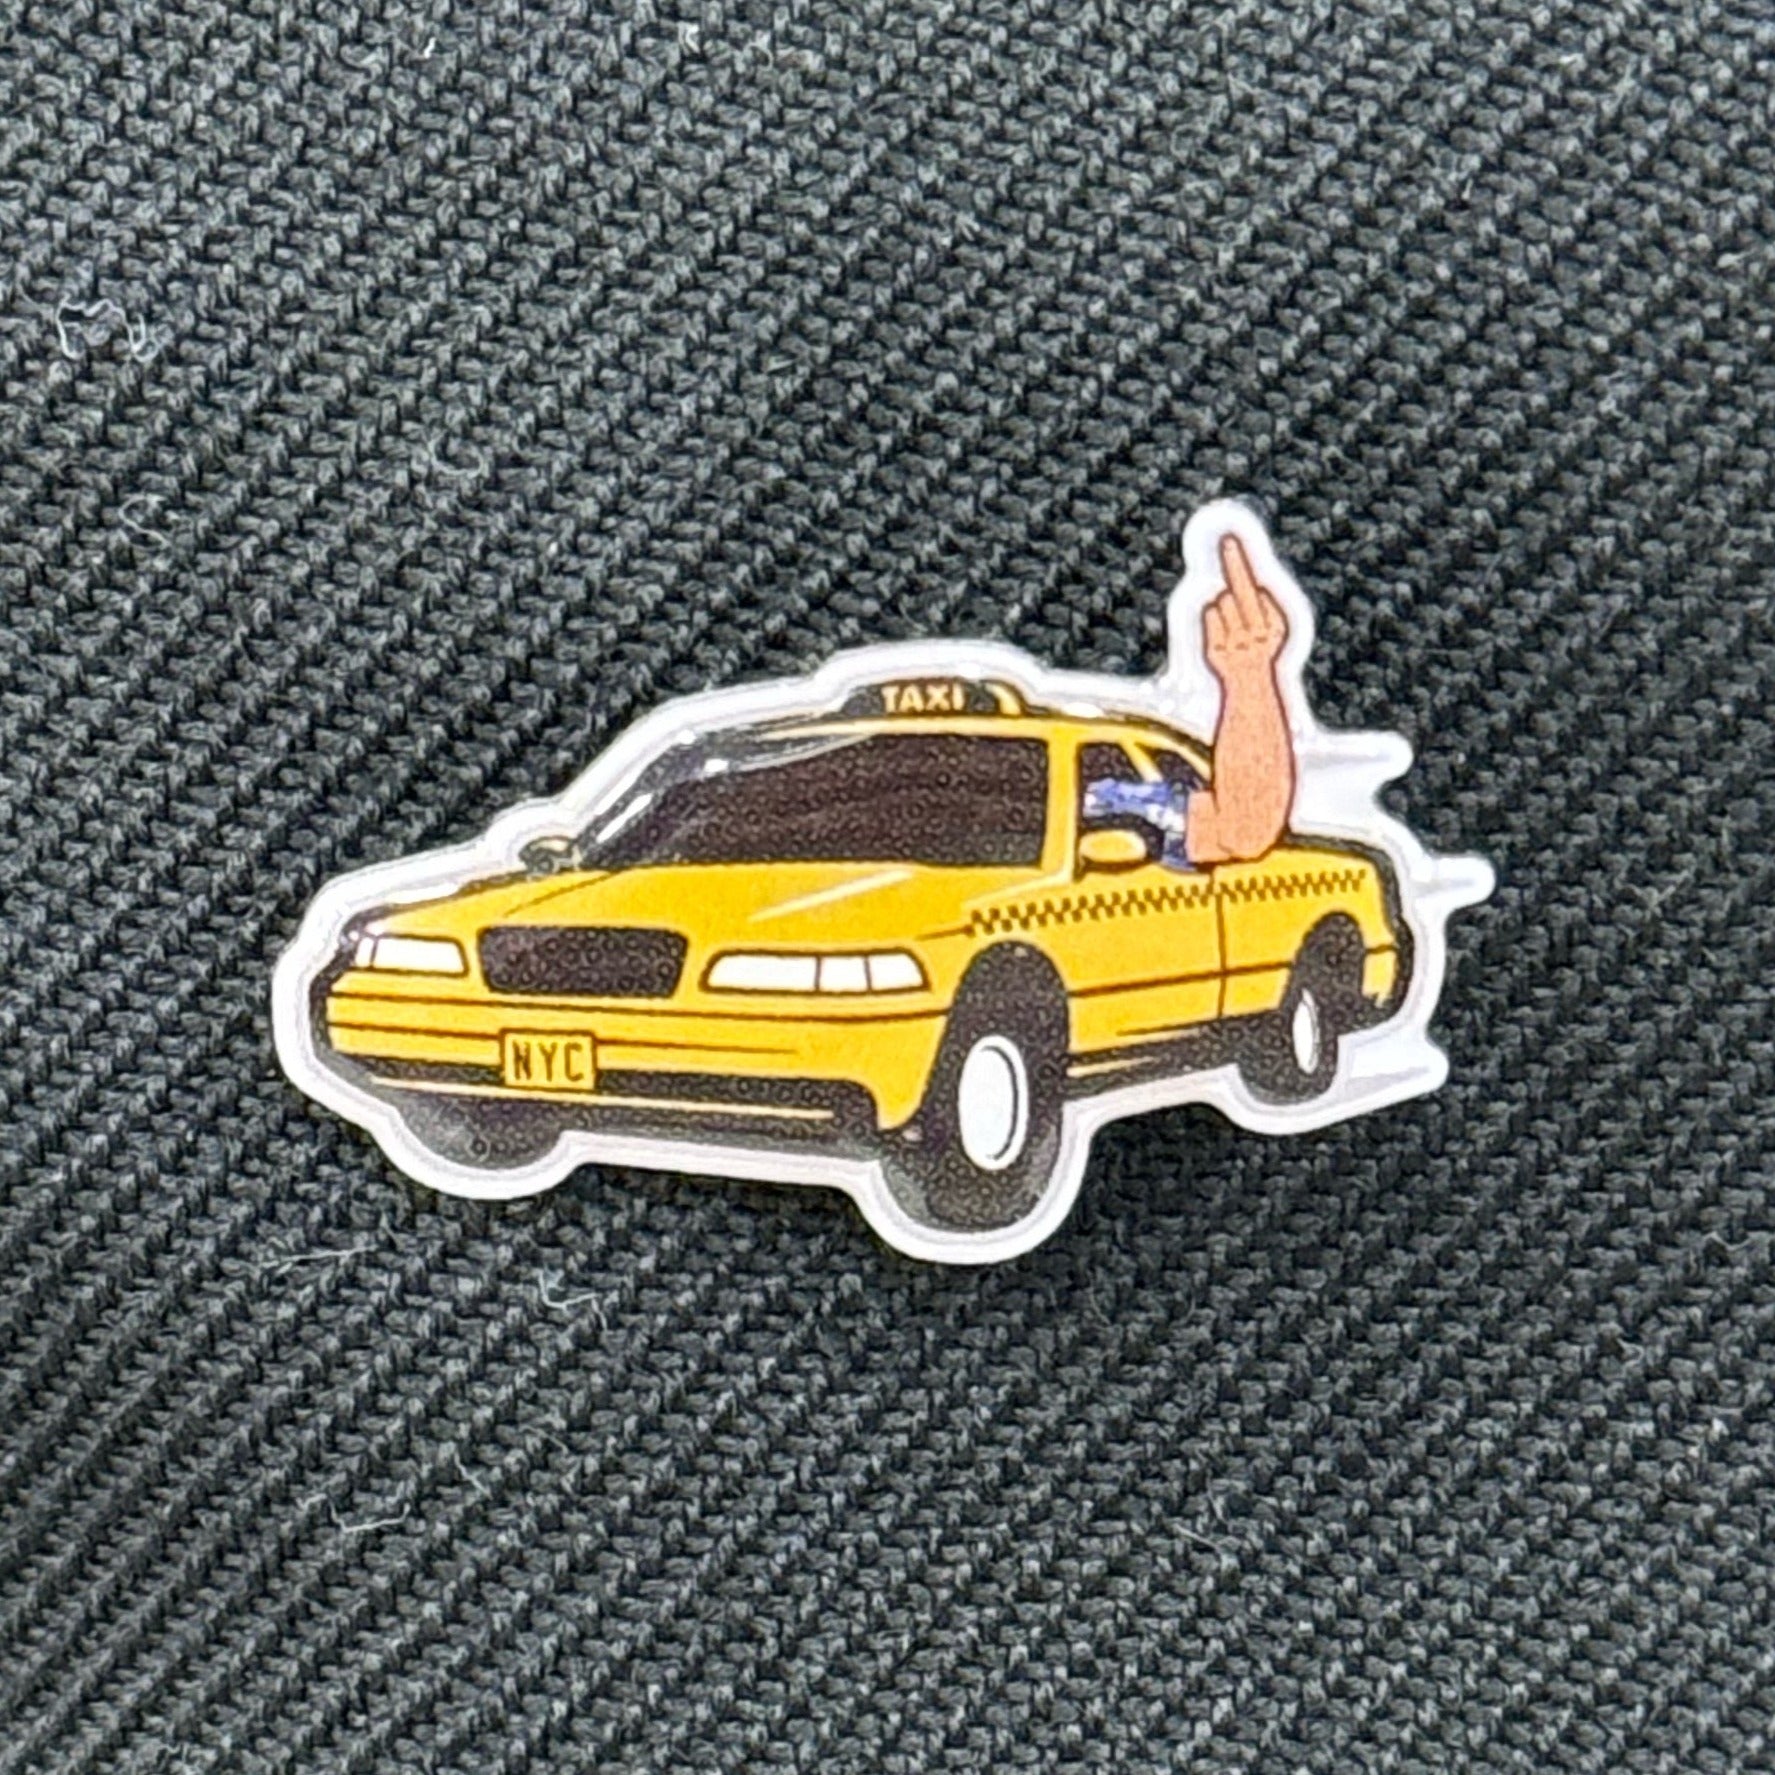 MIGHTY NYC TAXI PIN